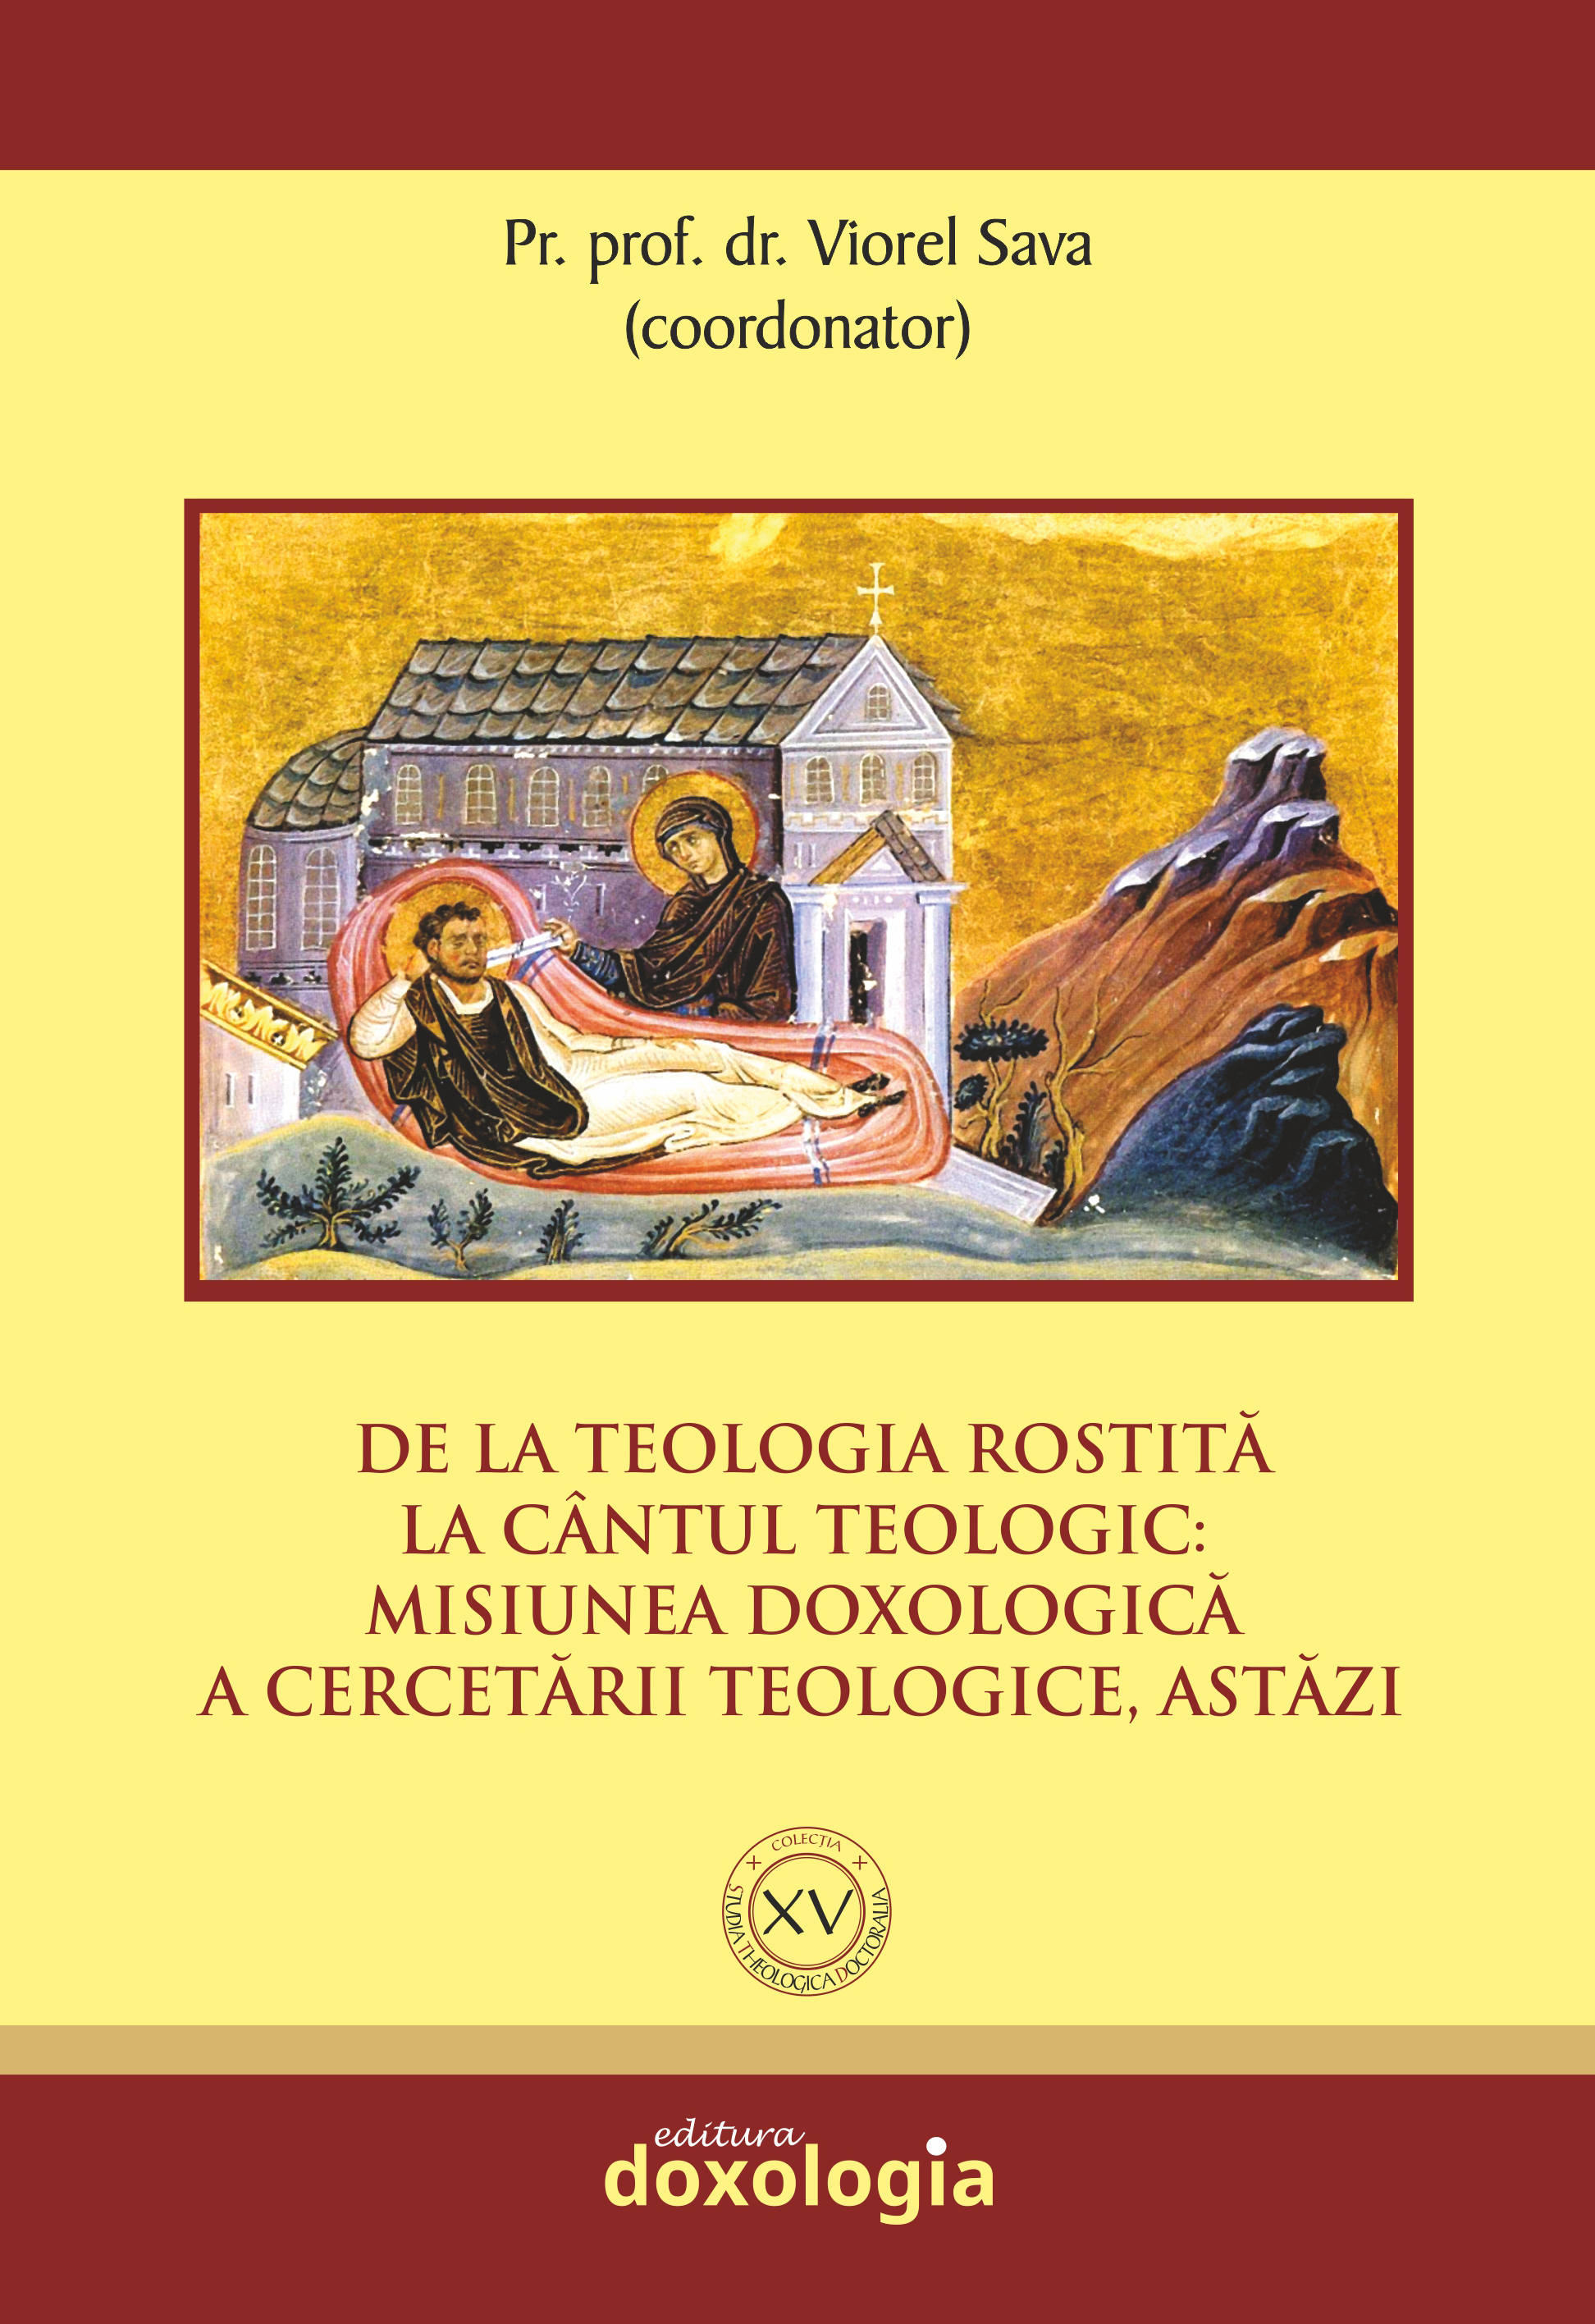 Mariological elements of liturgical spirituality in the writings of early Christian authors Cover Image